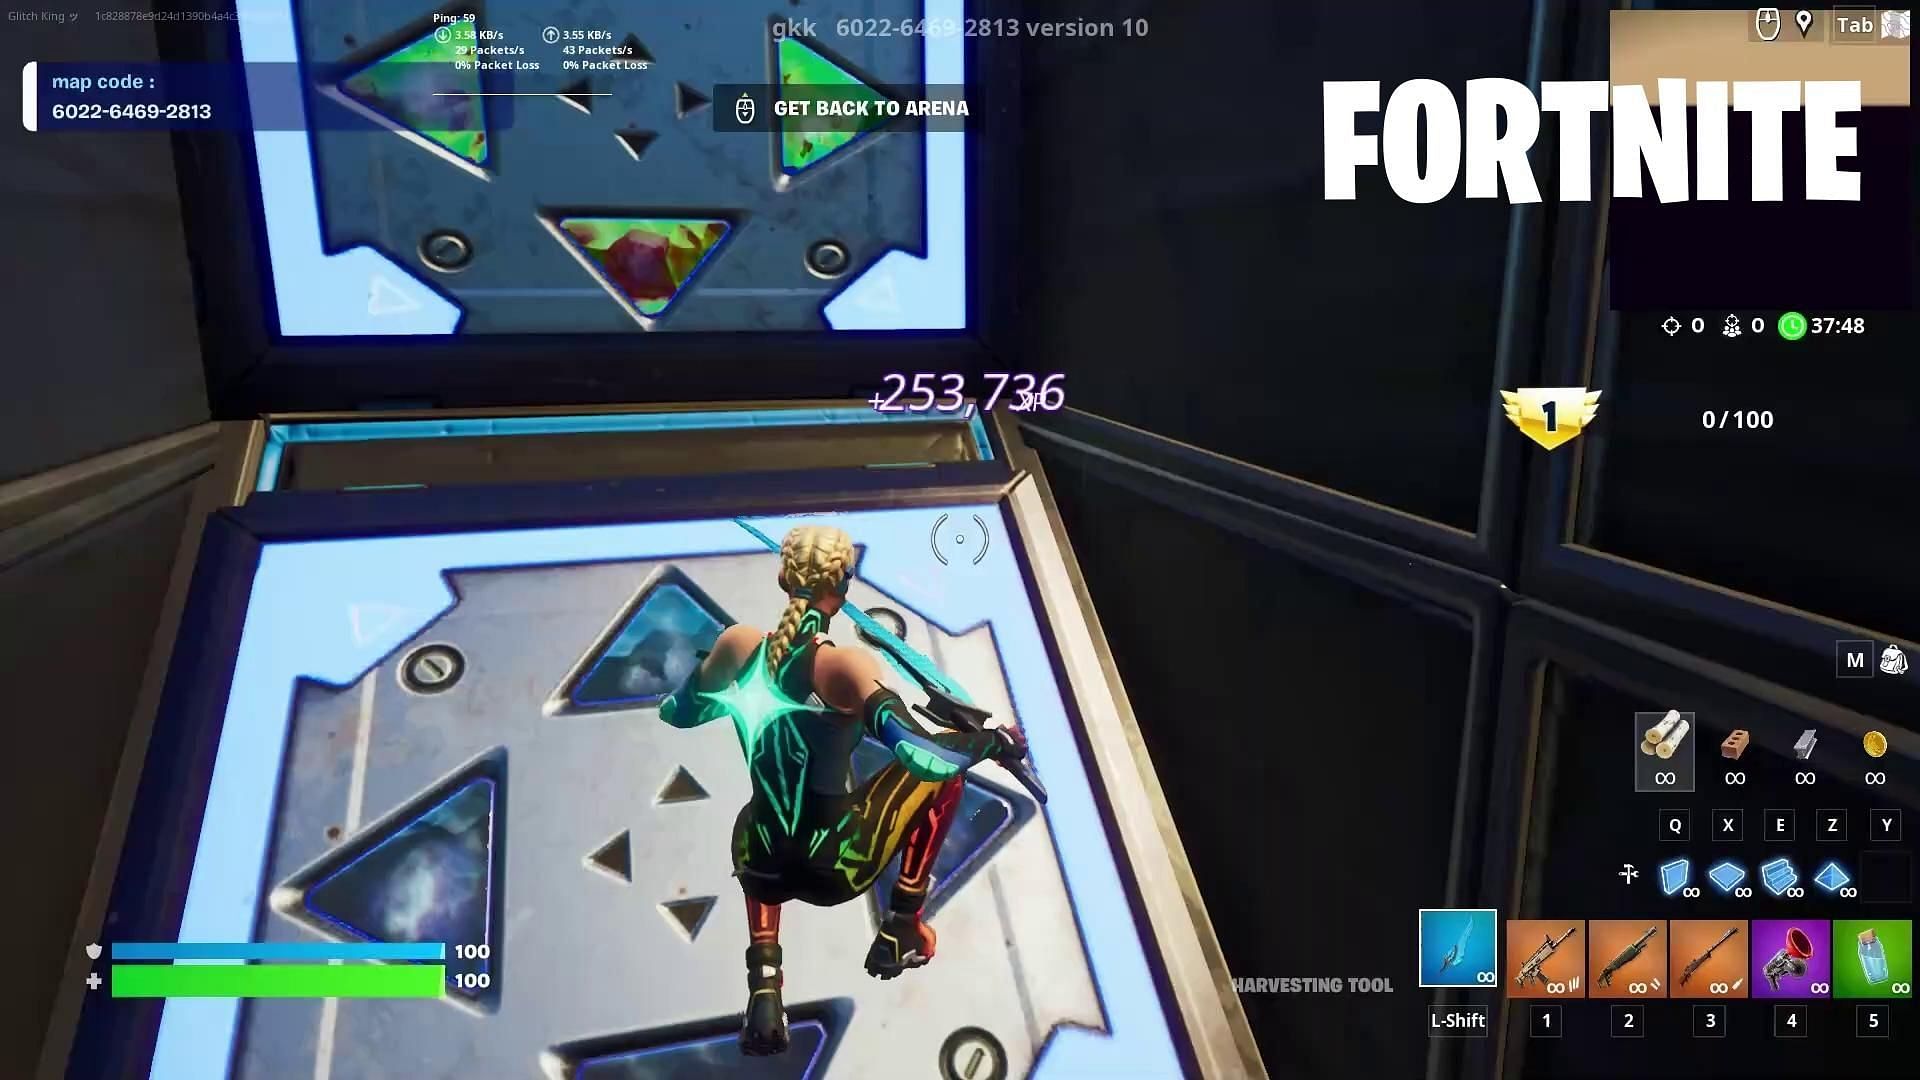 Travelling across different rooms in the XP map can increase the amount of XP players can get (Image via YouTube/GKI)